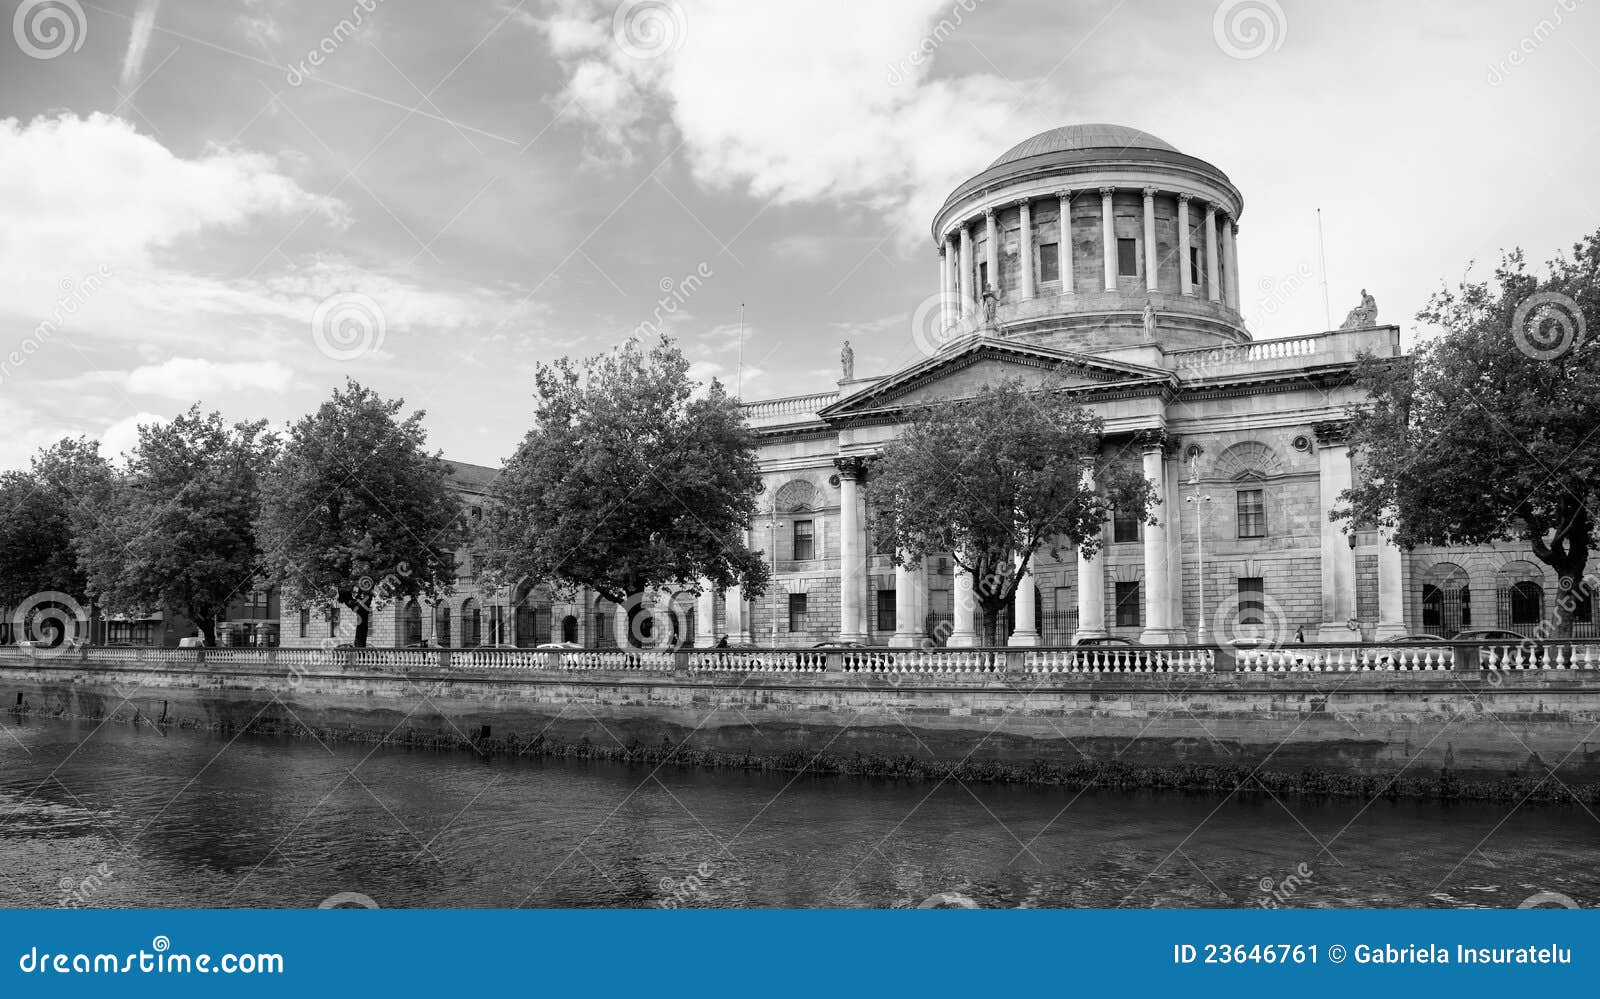 four courts in dublin